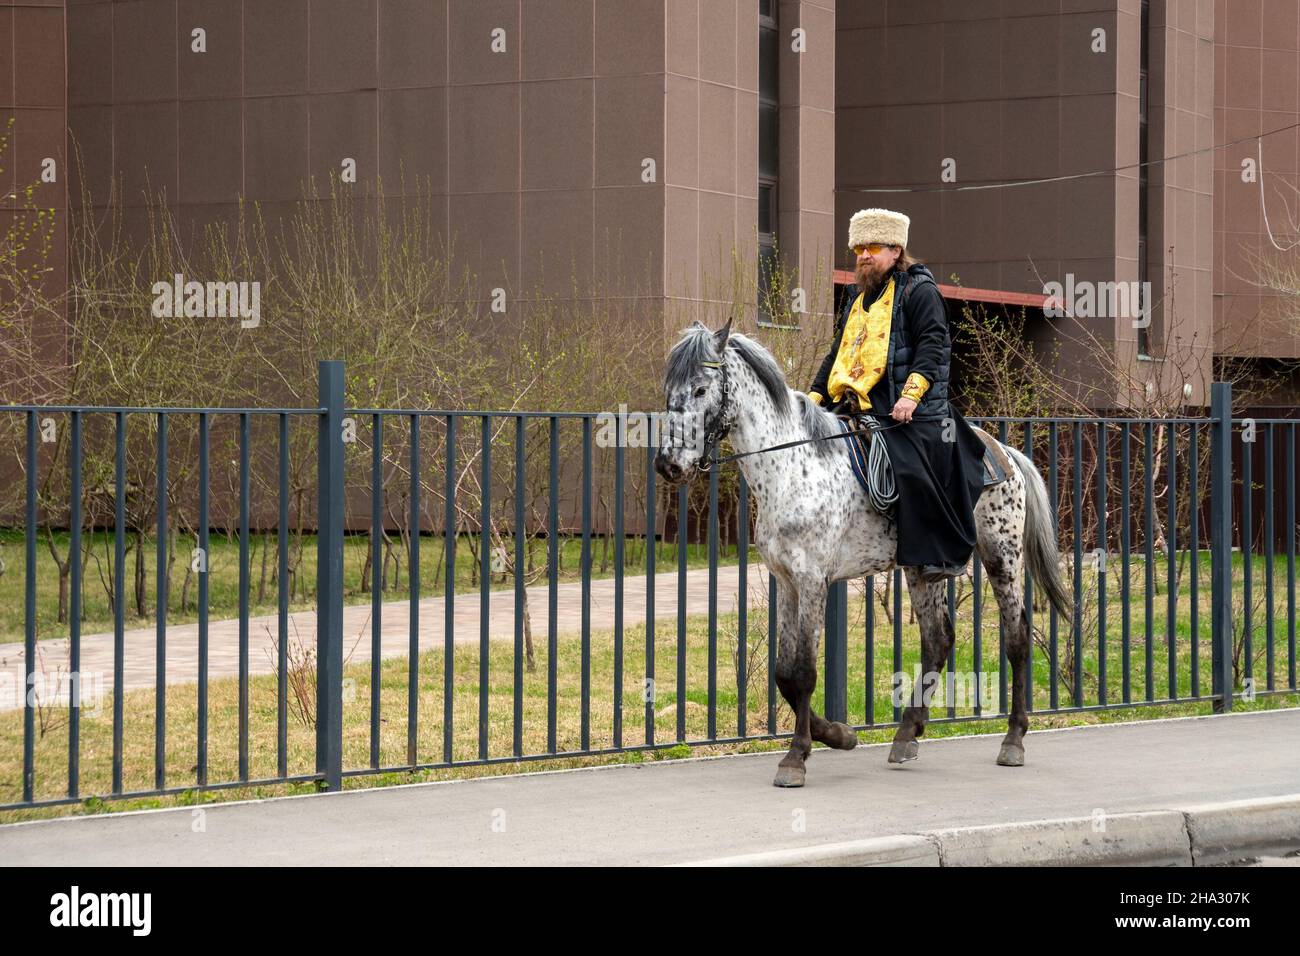 A clergyman in a cassock and hat, with a cross on his chest, rides a horse along the sidewalk along a metal fence in the spring. Stock Photo